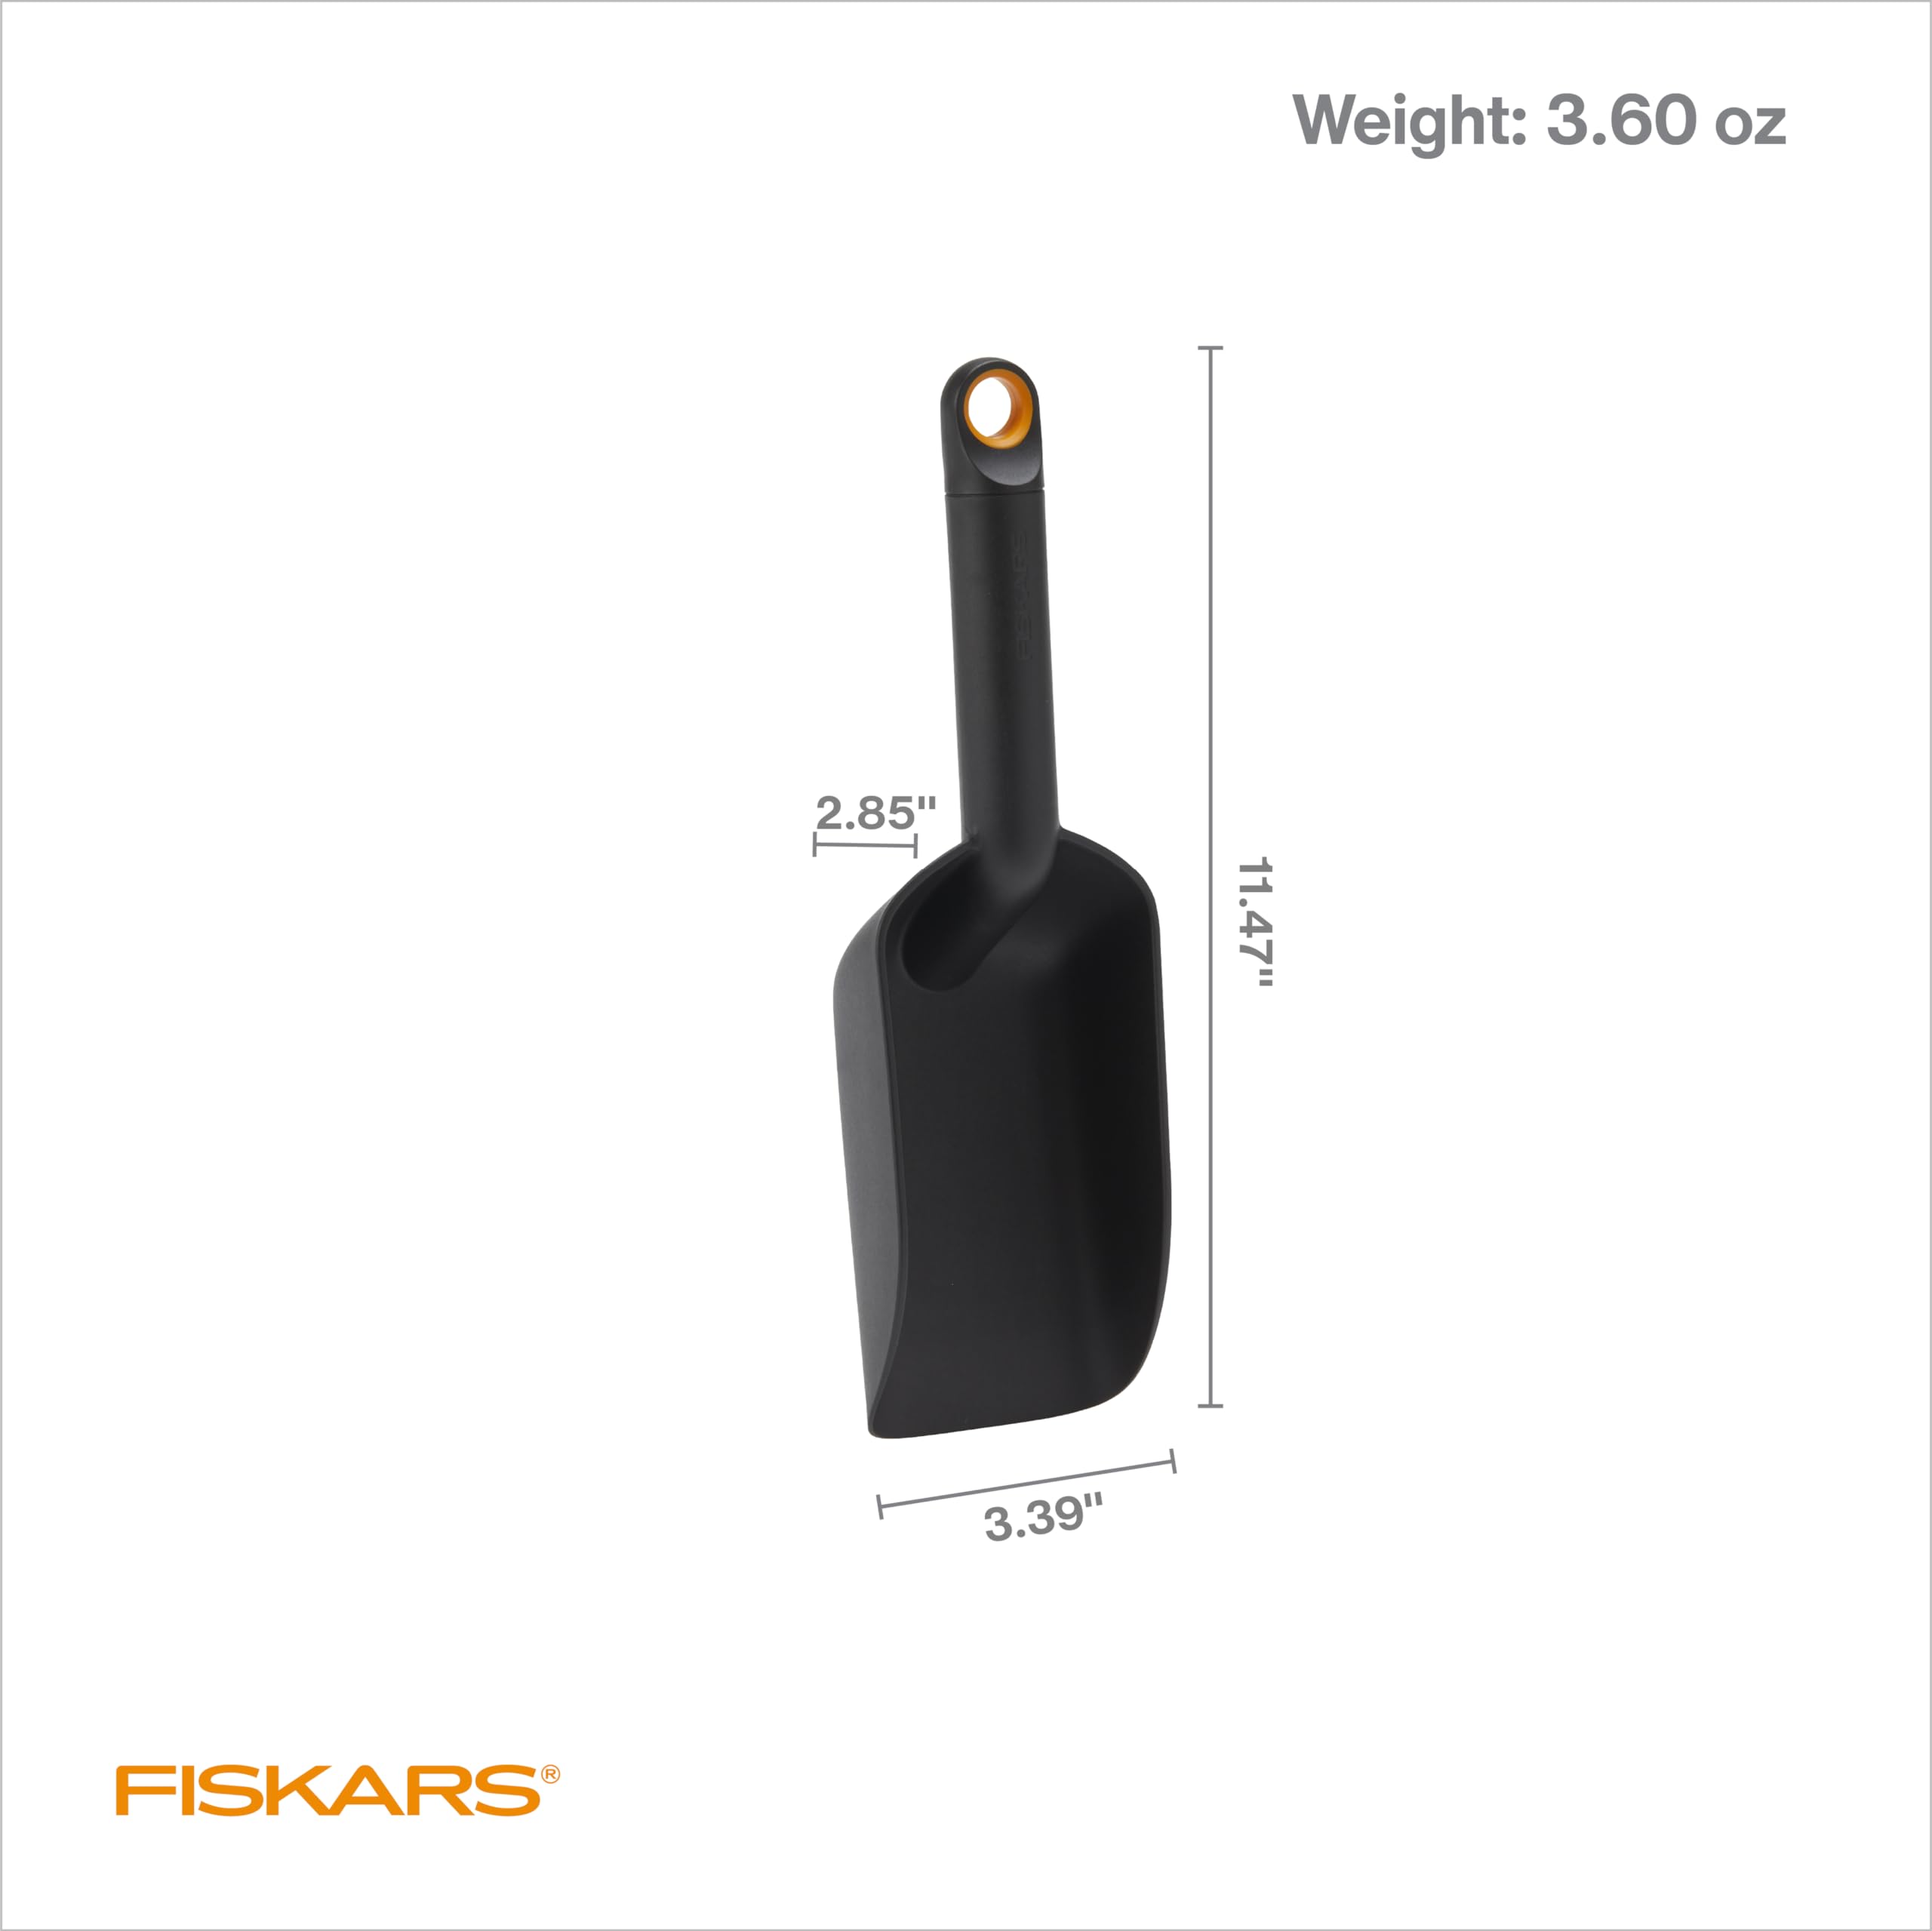 FISKARS Soil Scoop (1.5 c) for Potting and Transplanting with Flat Bottom - Indoor Gardening - Made with Durable Recycled Plastic